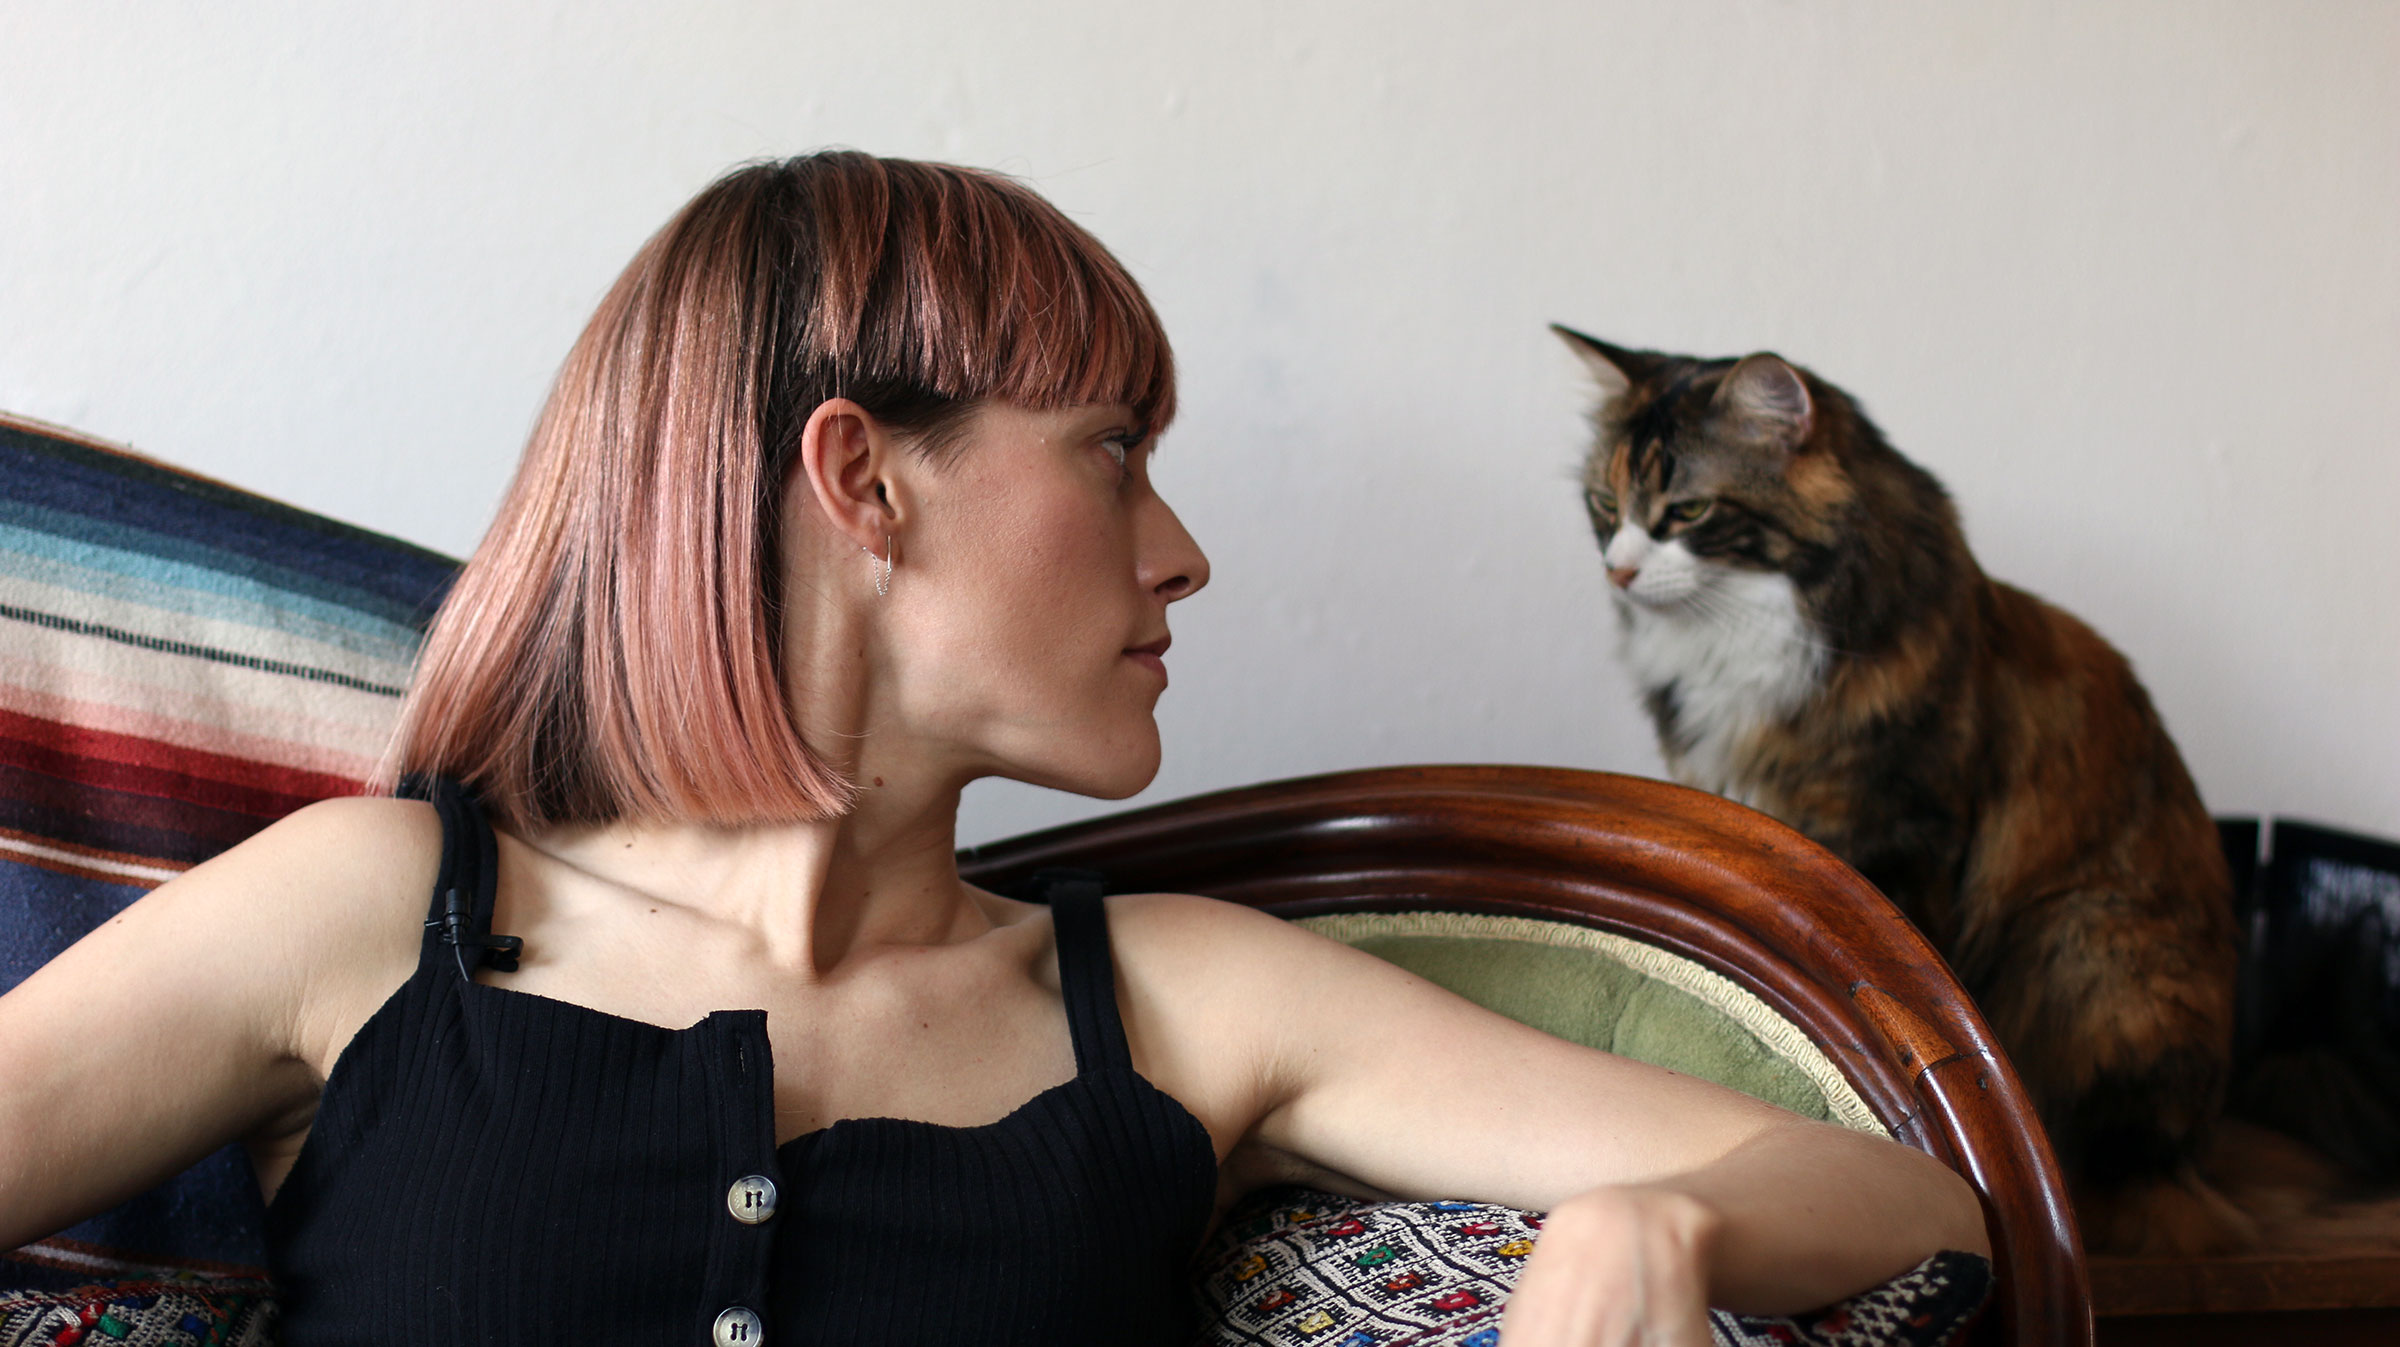 Lucy Dhegrae and her cat Mona (2 of 2)